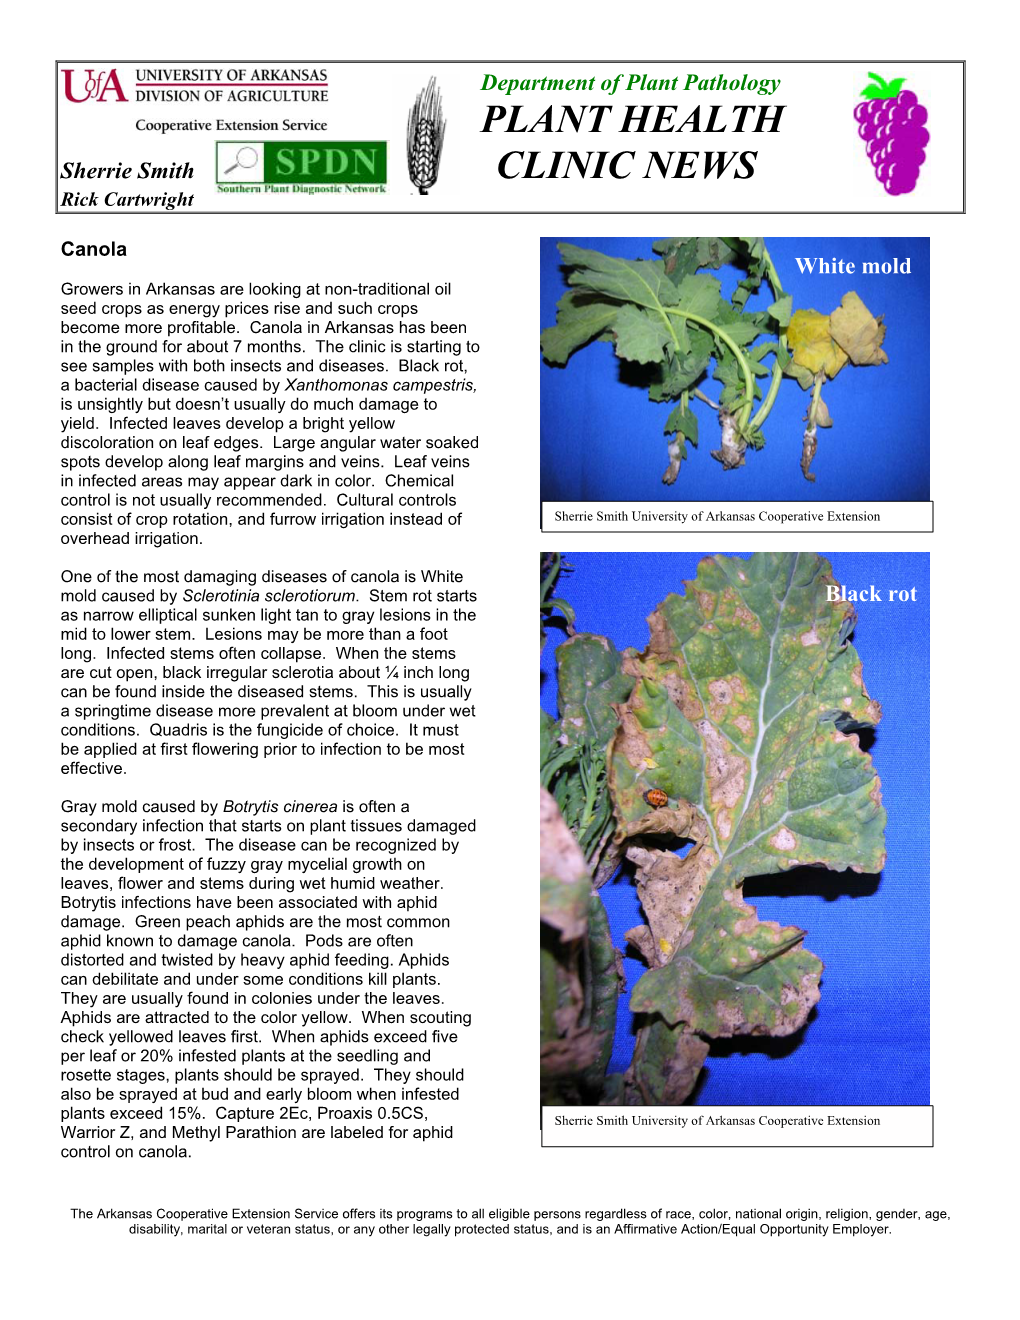 Plant Health Clinic News, Issue 7, 2007